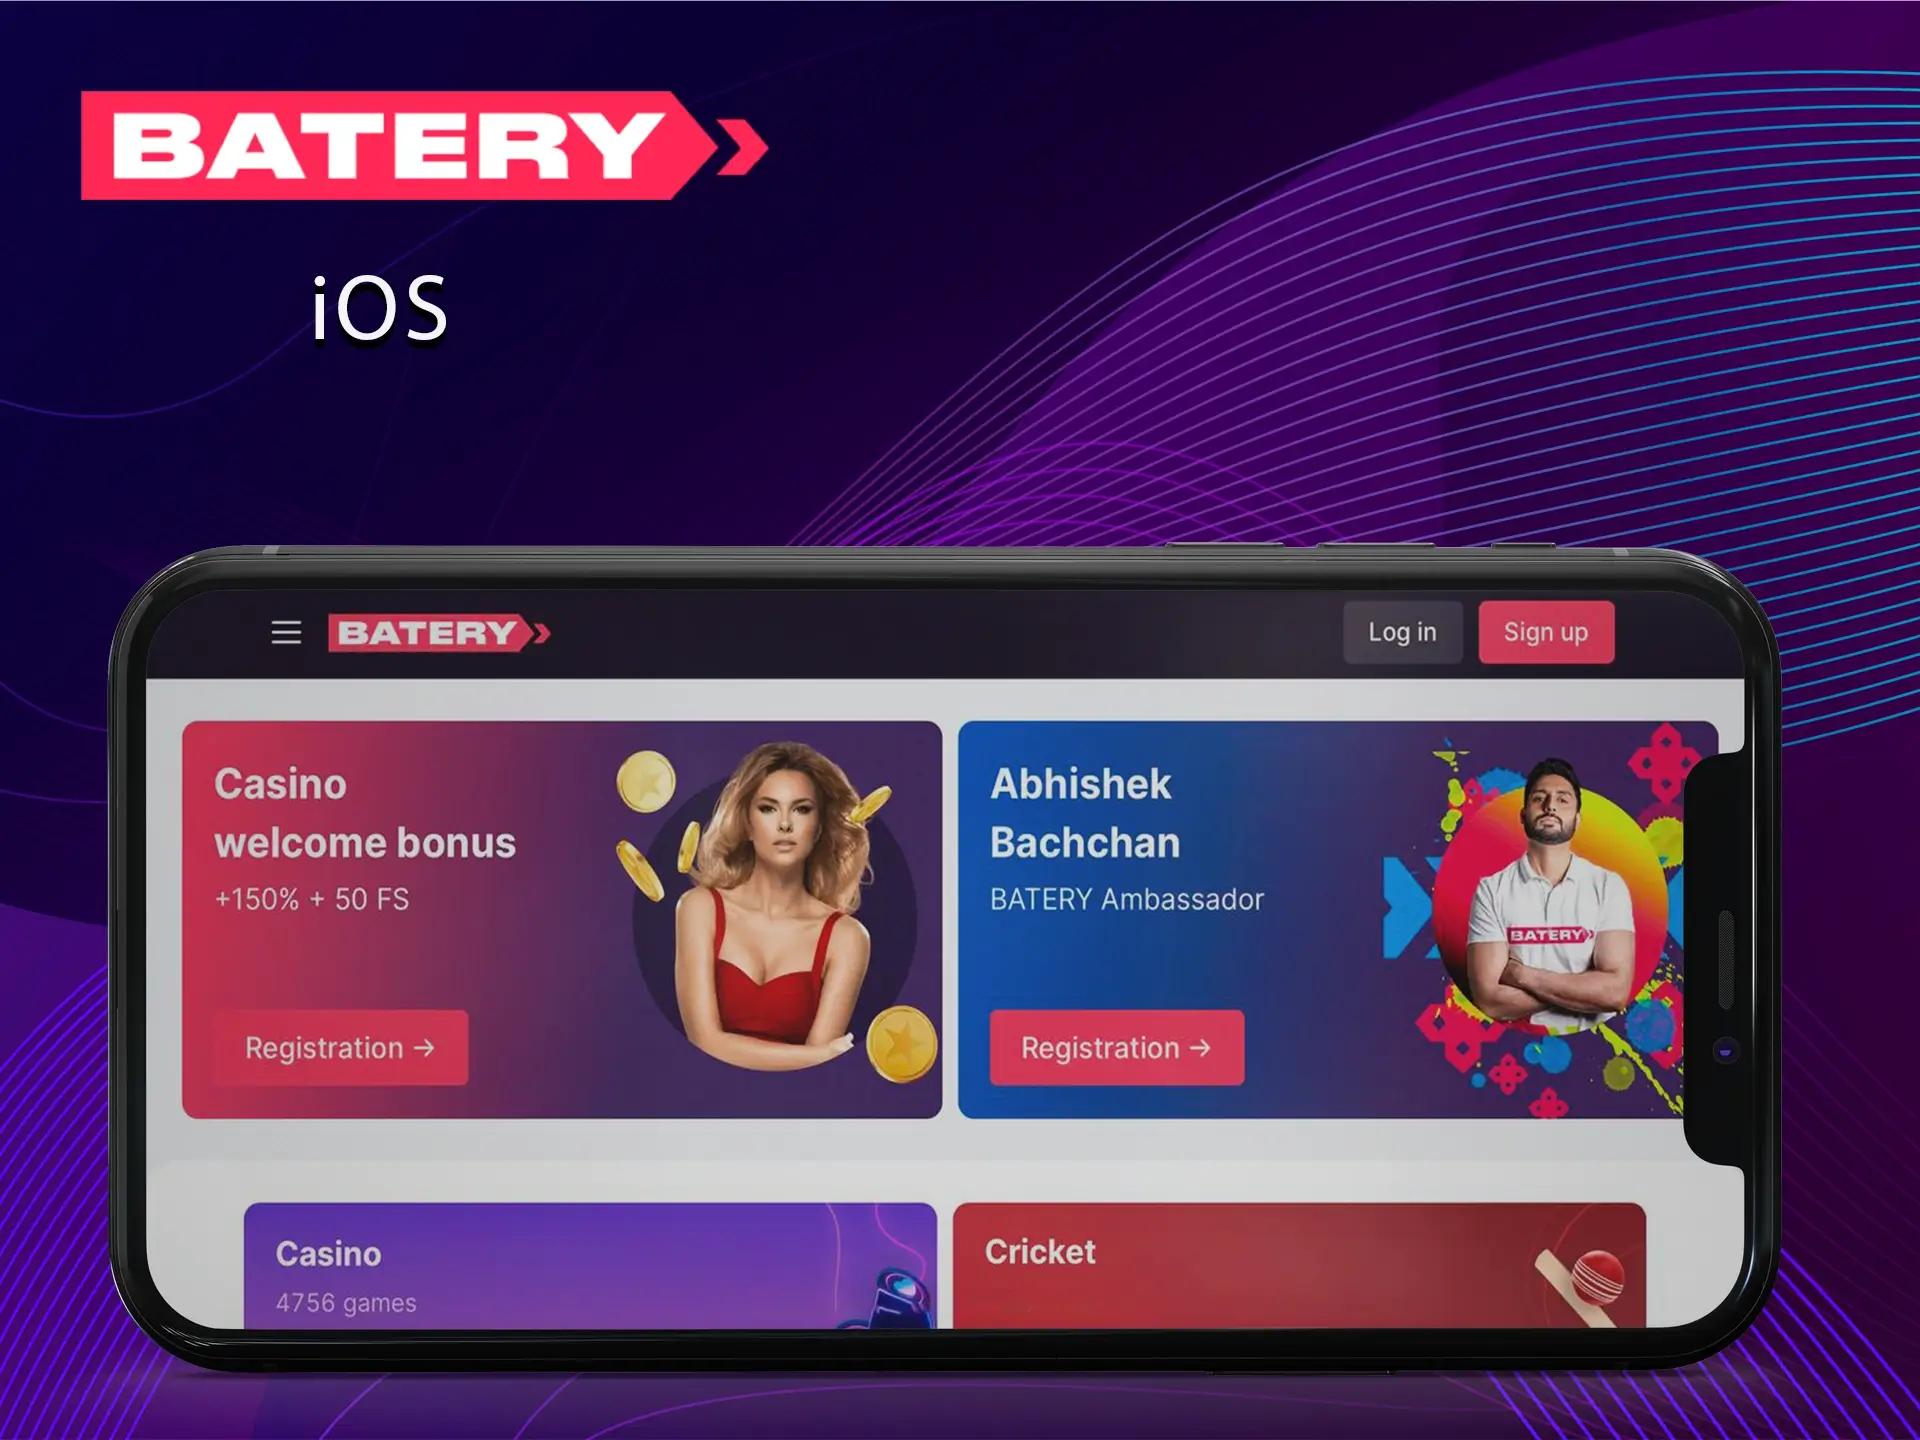 By using Batery's mobile site through your Siri browser, you'll get high performance and quality.